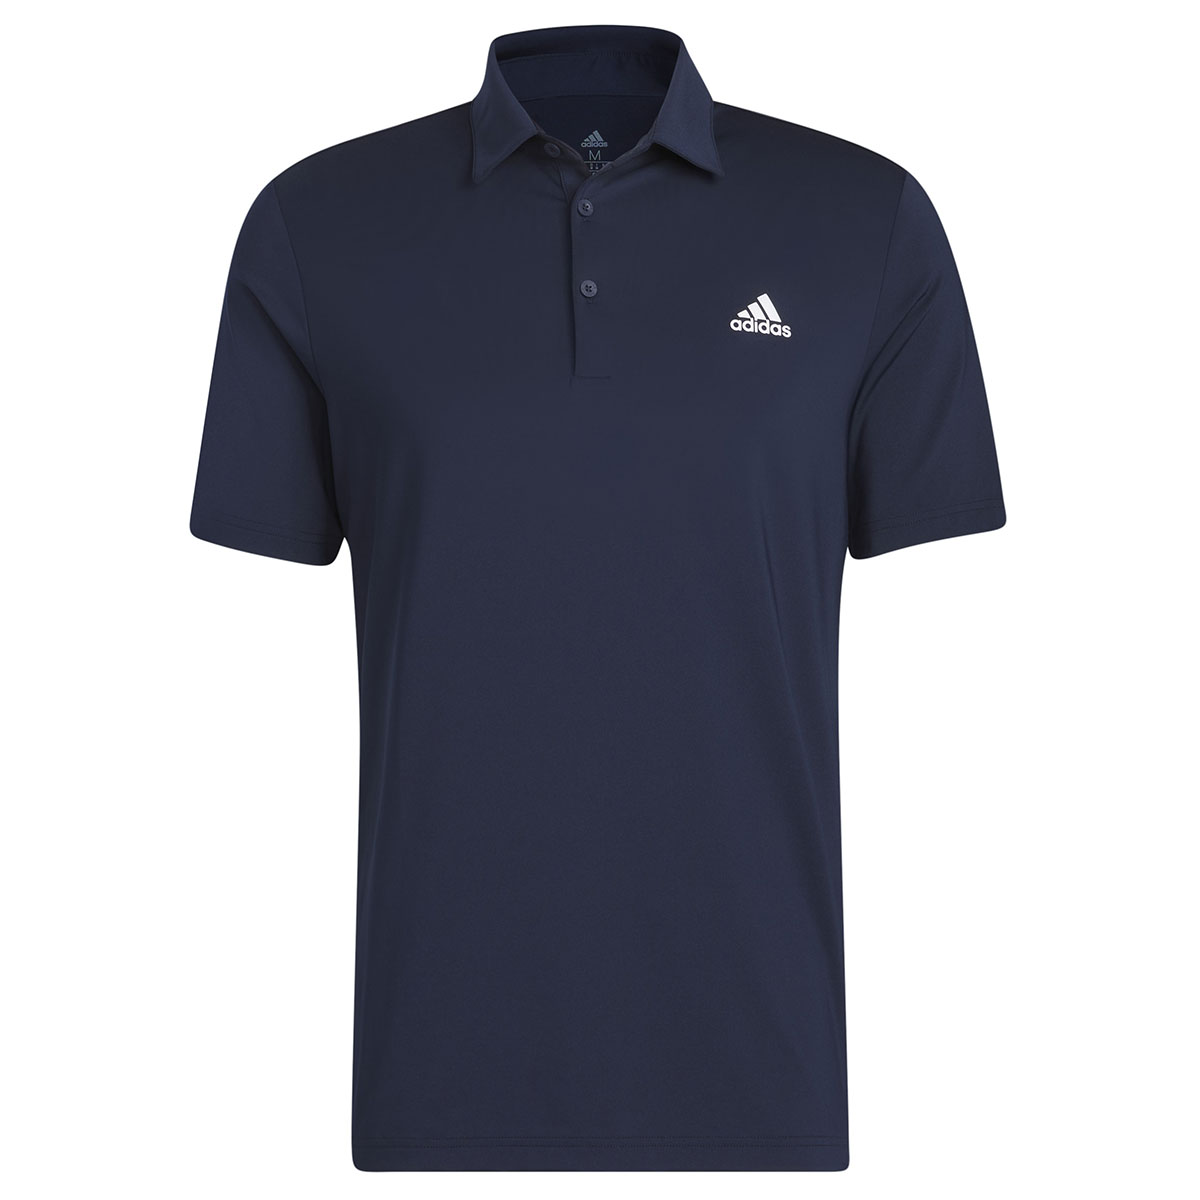 adidas Golf Ultimate365 Solid Left Chest Golf Polo Shirt from american golf